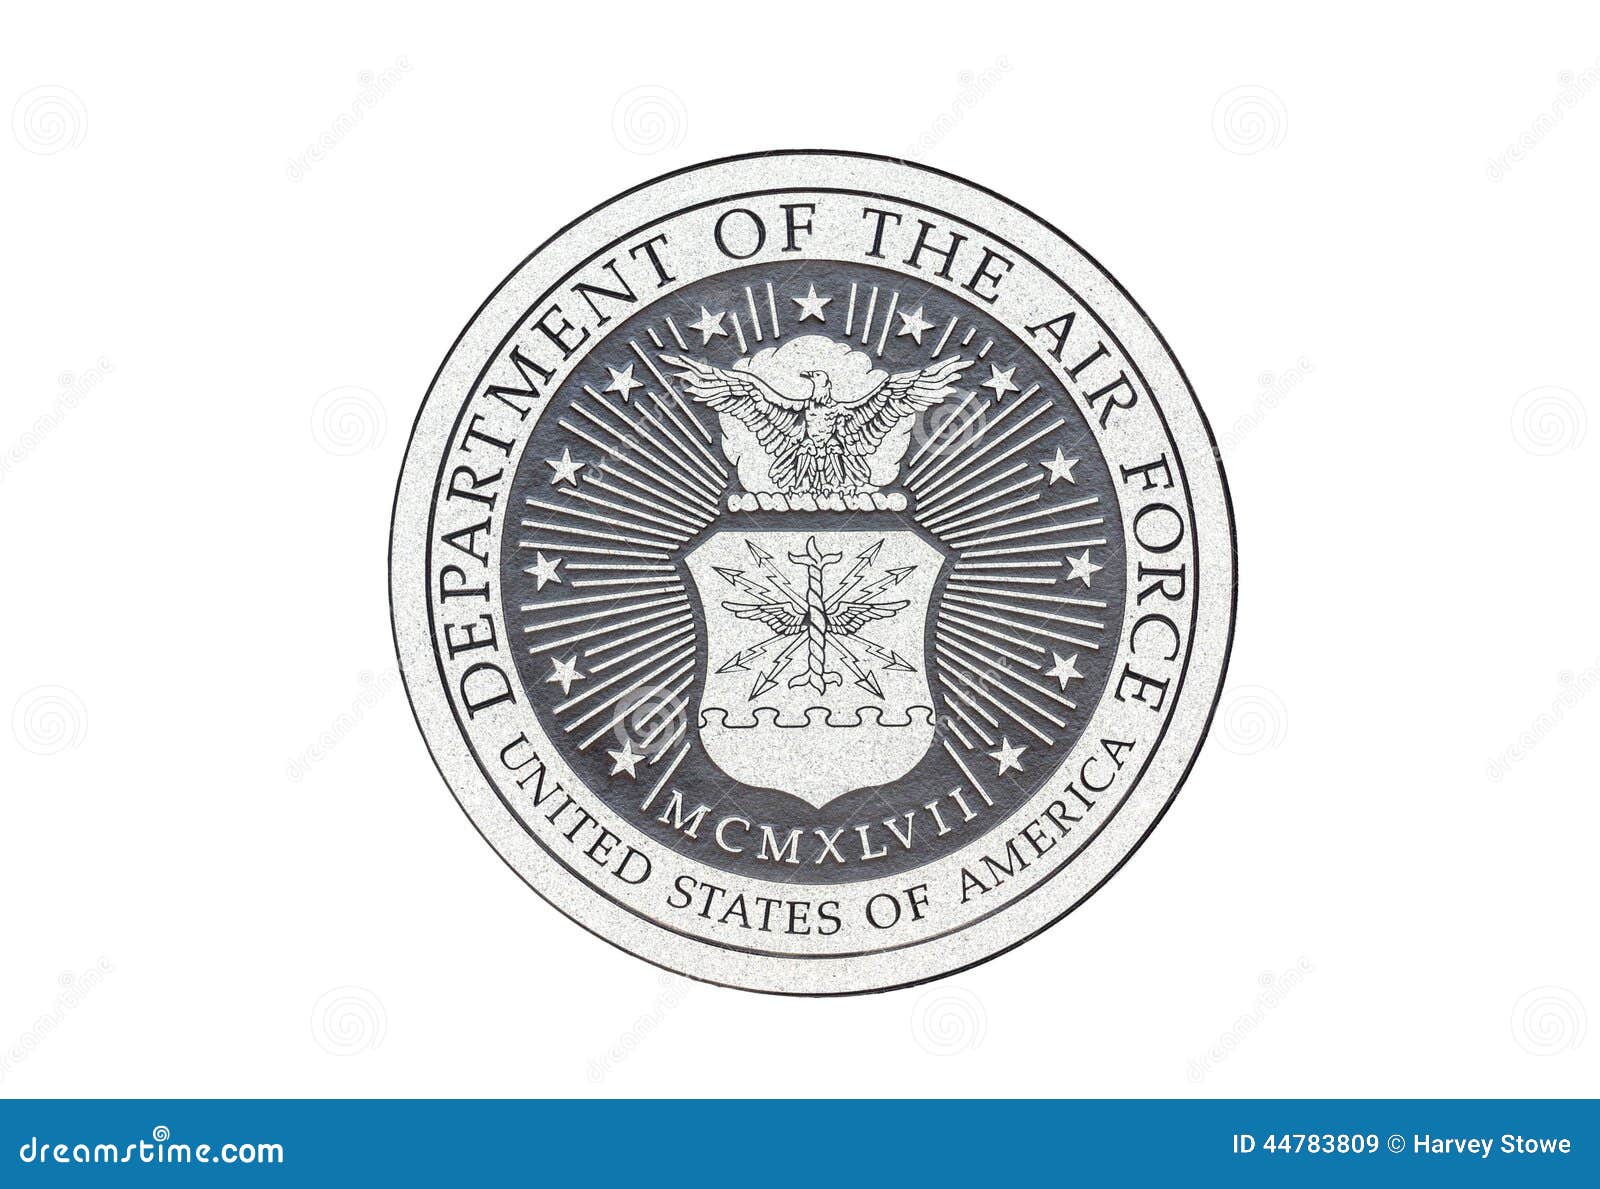 u.s. air force official seal